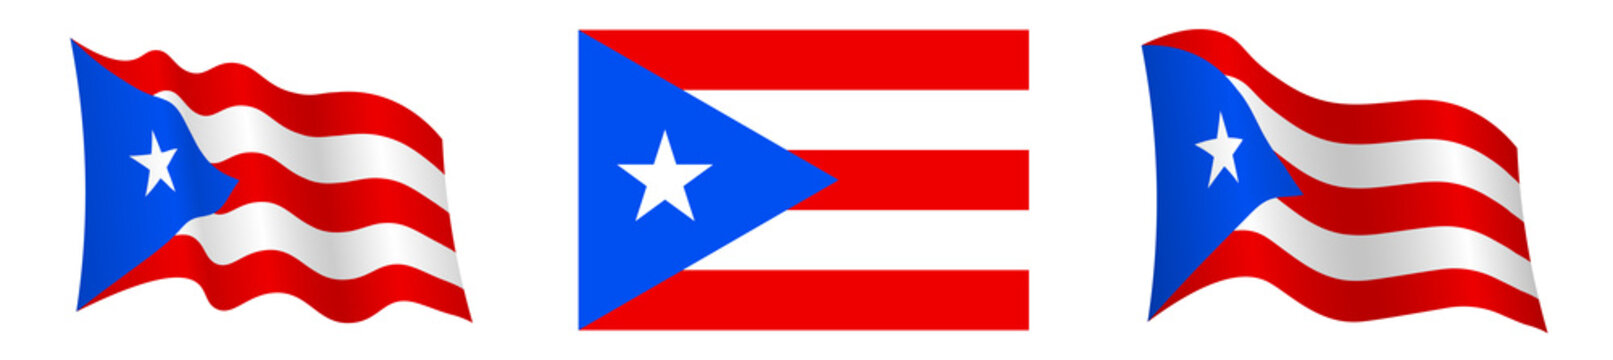 flag of Puerto Rico in static position and in motion, fluttering in wind in exact colors and sizes, on white background